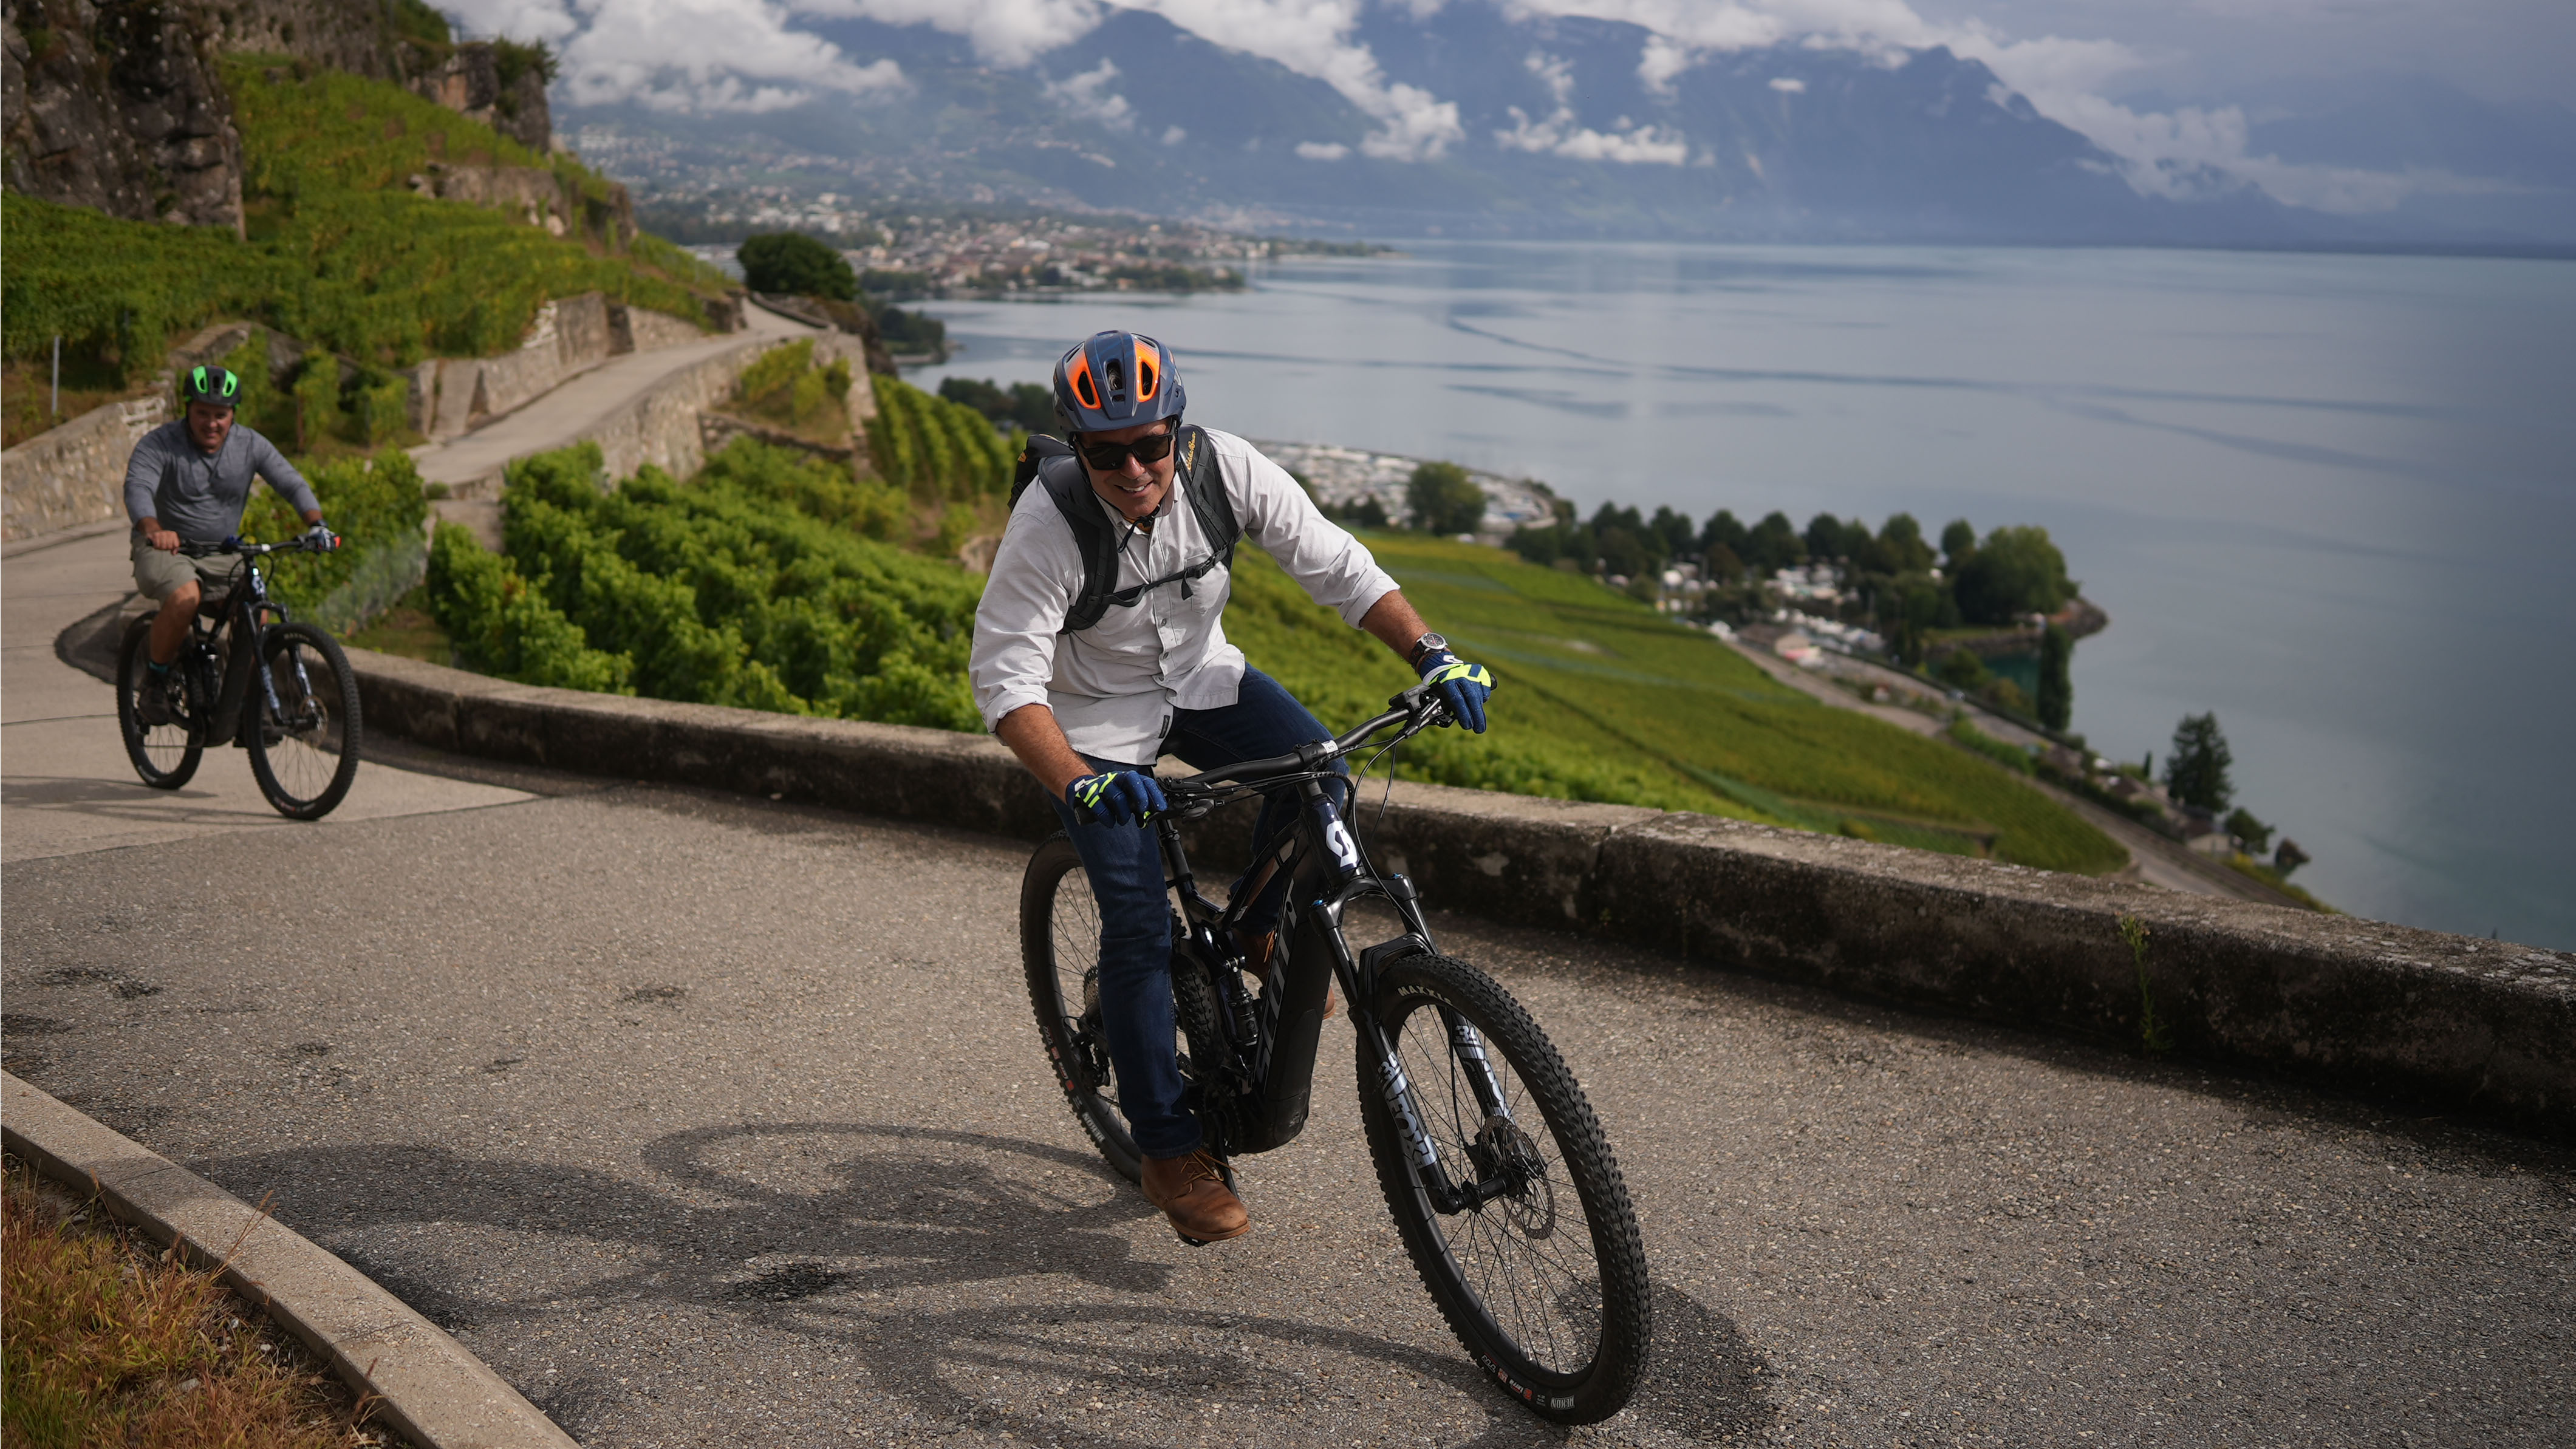 Jeff explores the organic vineyards of Lavaux above Lake Geneva on an e-bike. Download a zipped file of promotional materials in the Additional Assets section below.